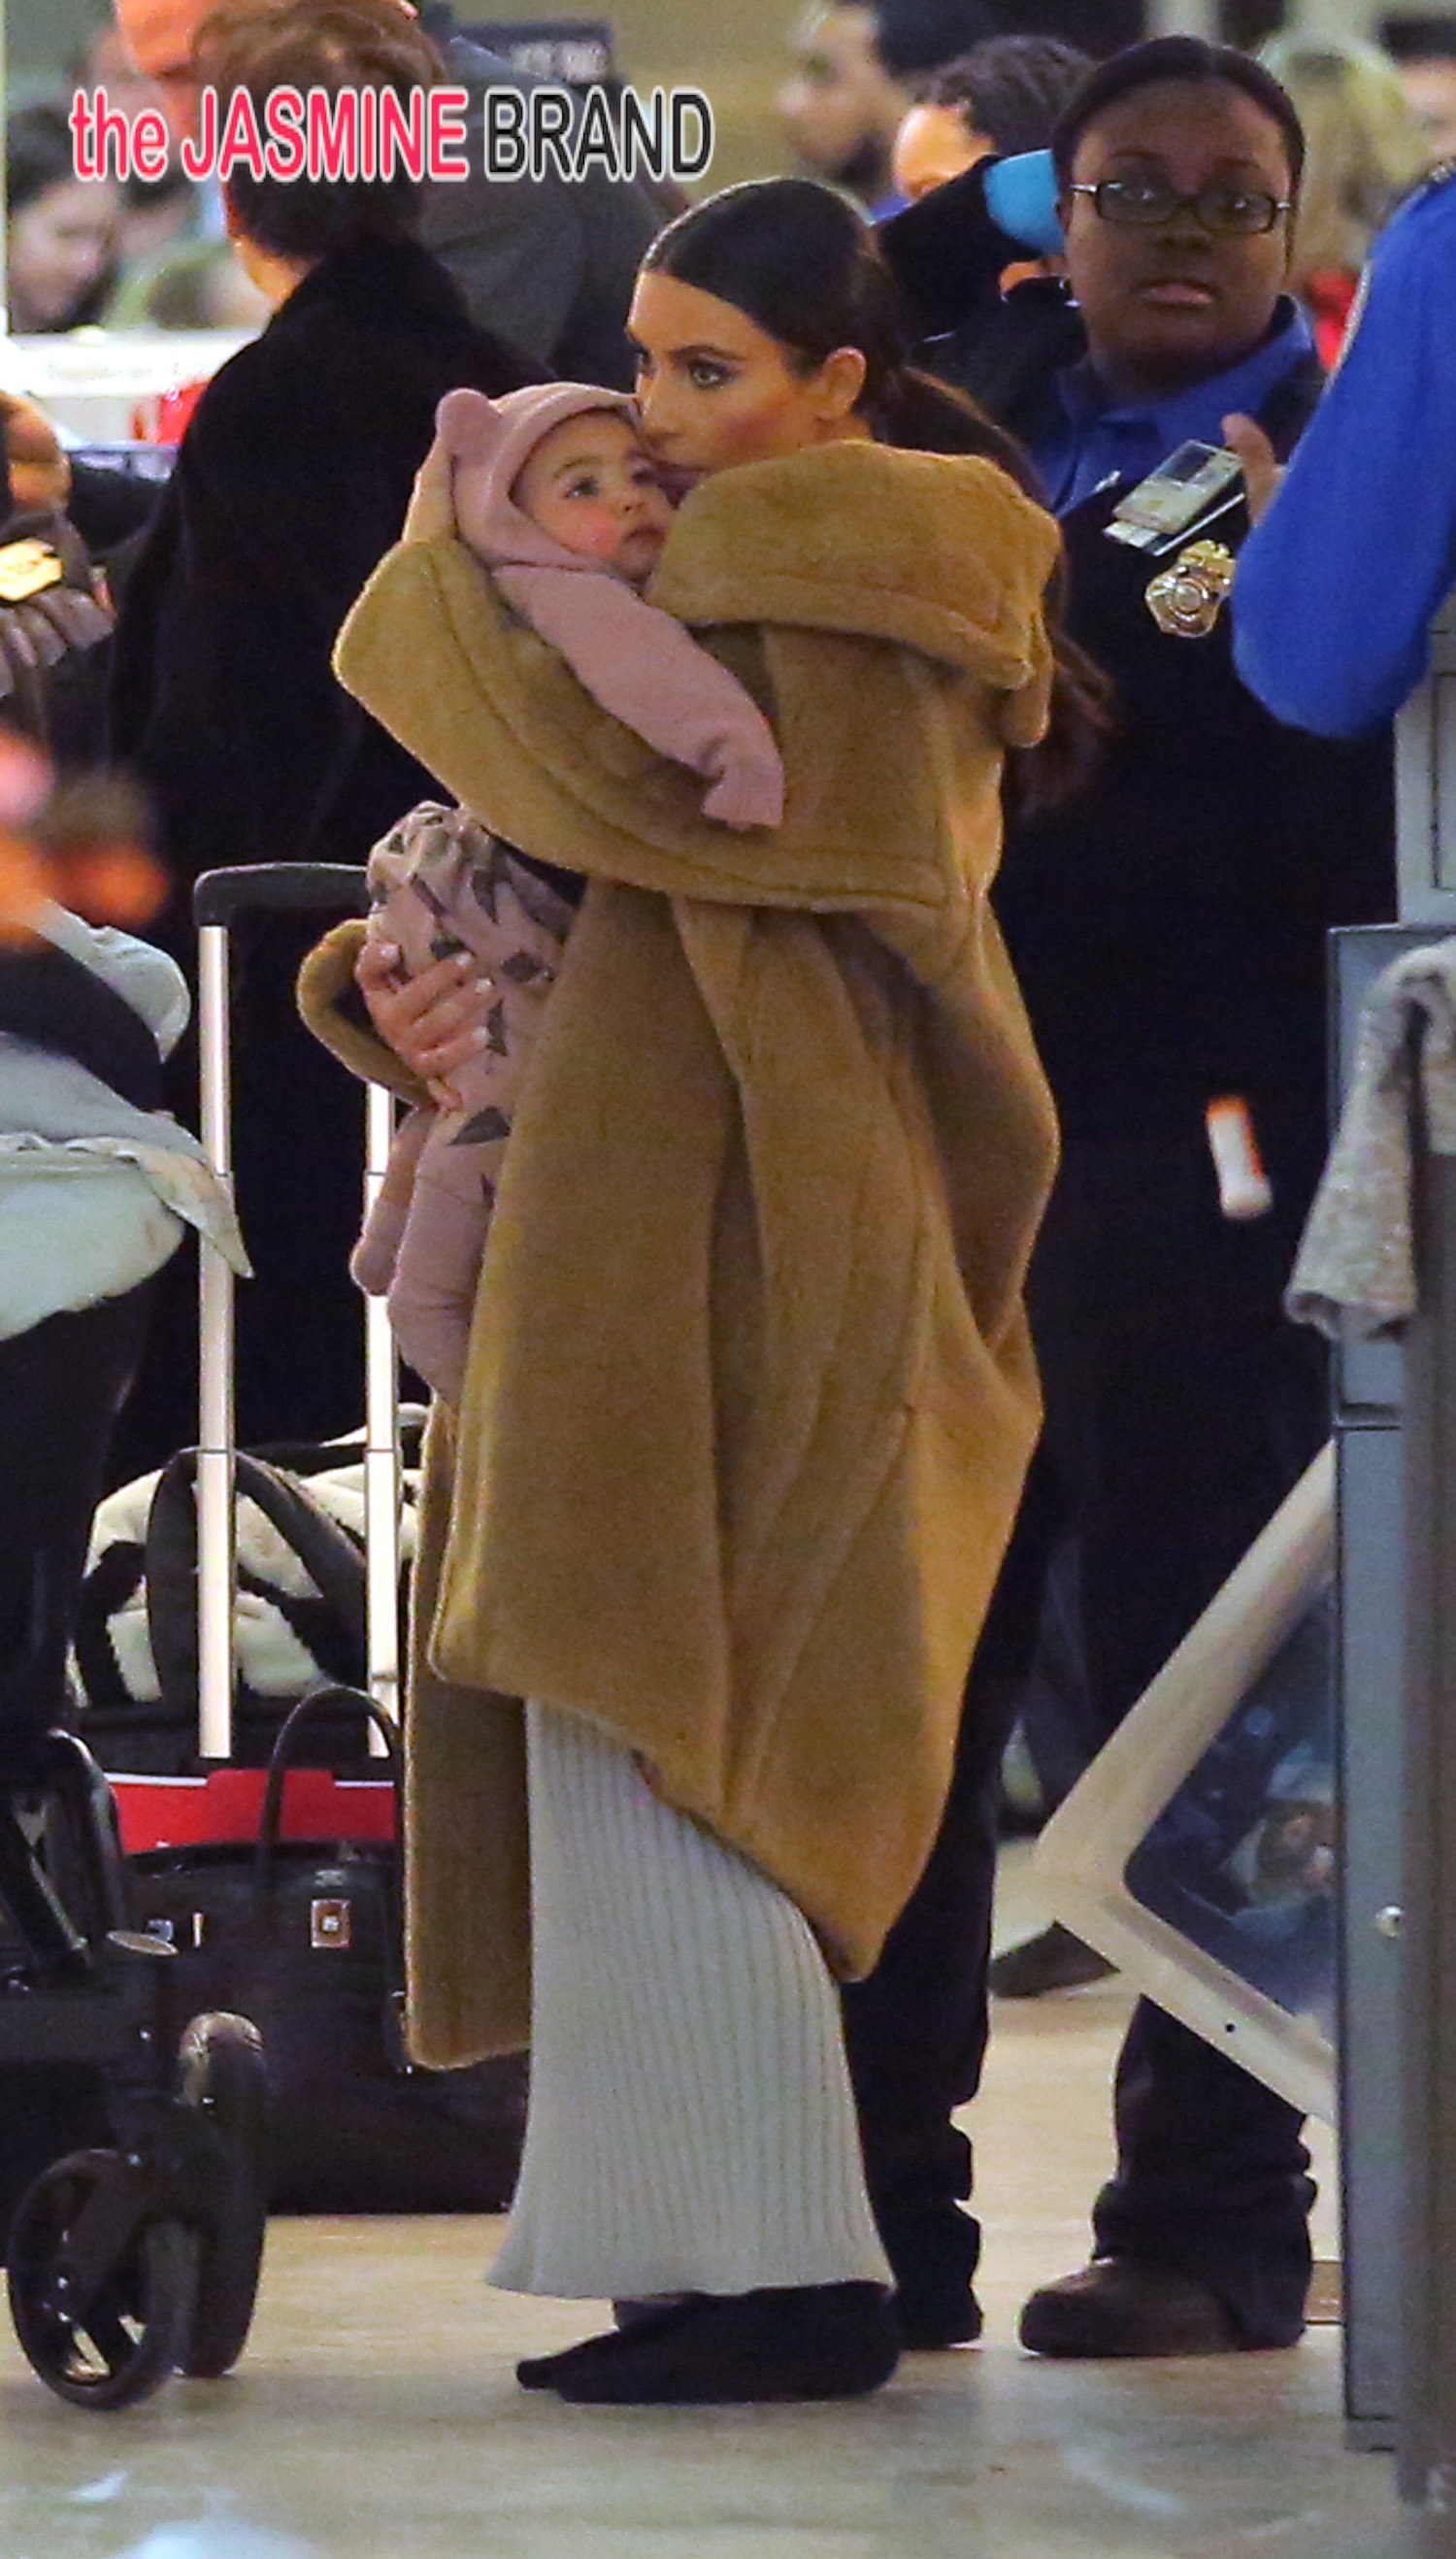 Kim Kardashian holds baby North West while wearing a fur coat NYC